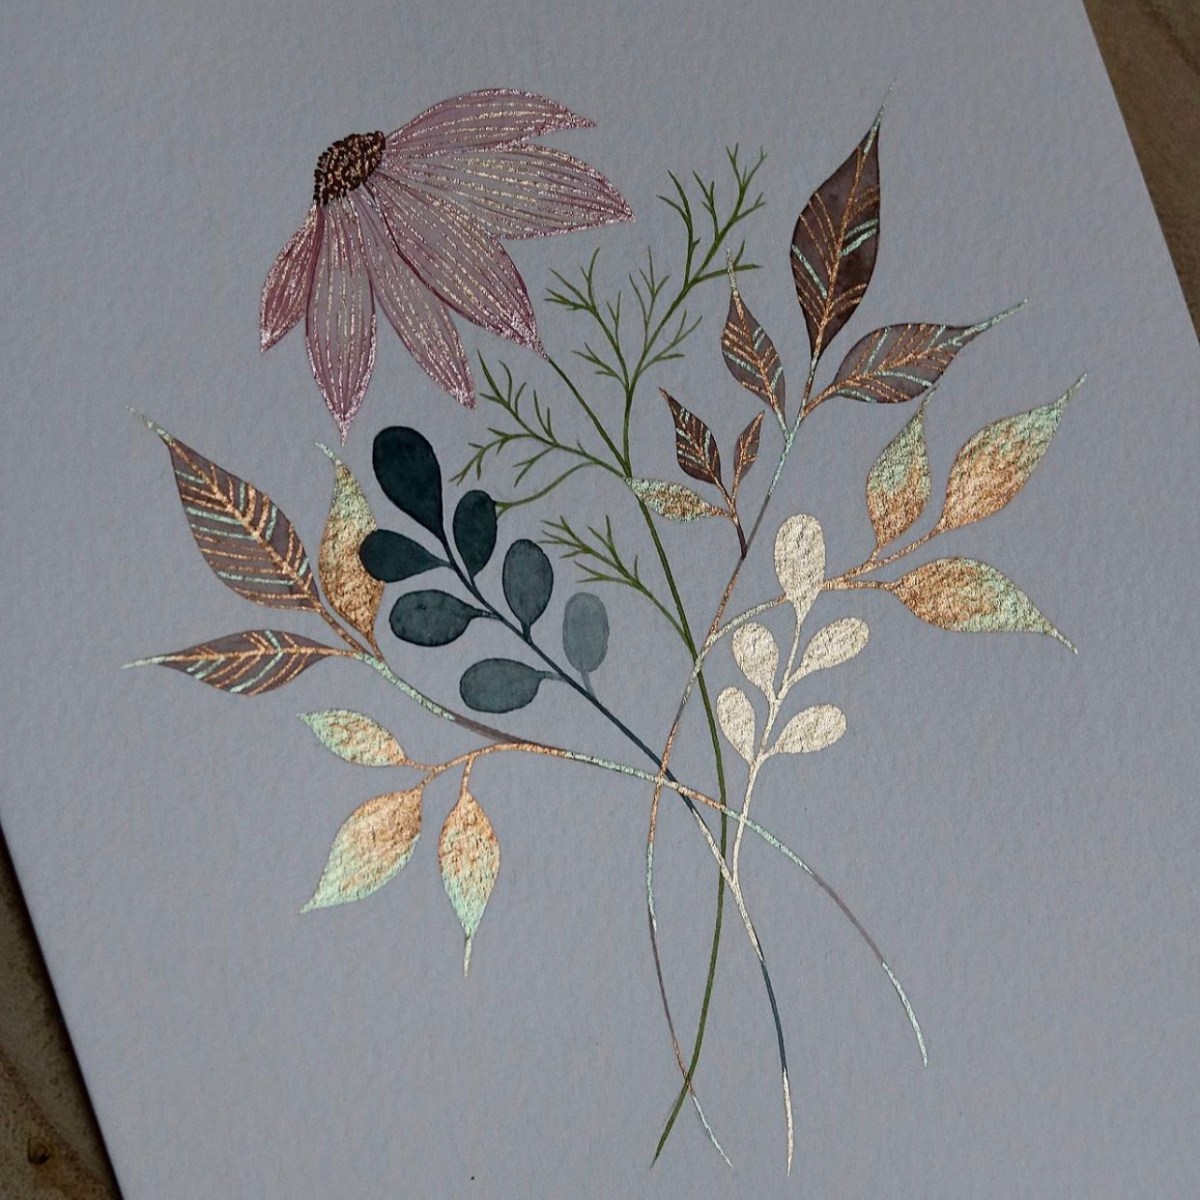 Metallic watercolour painting for beginners 